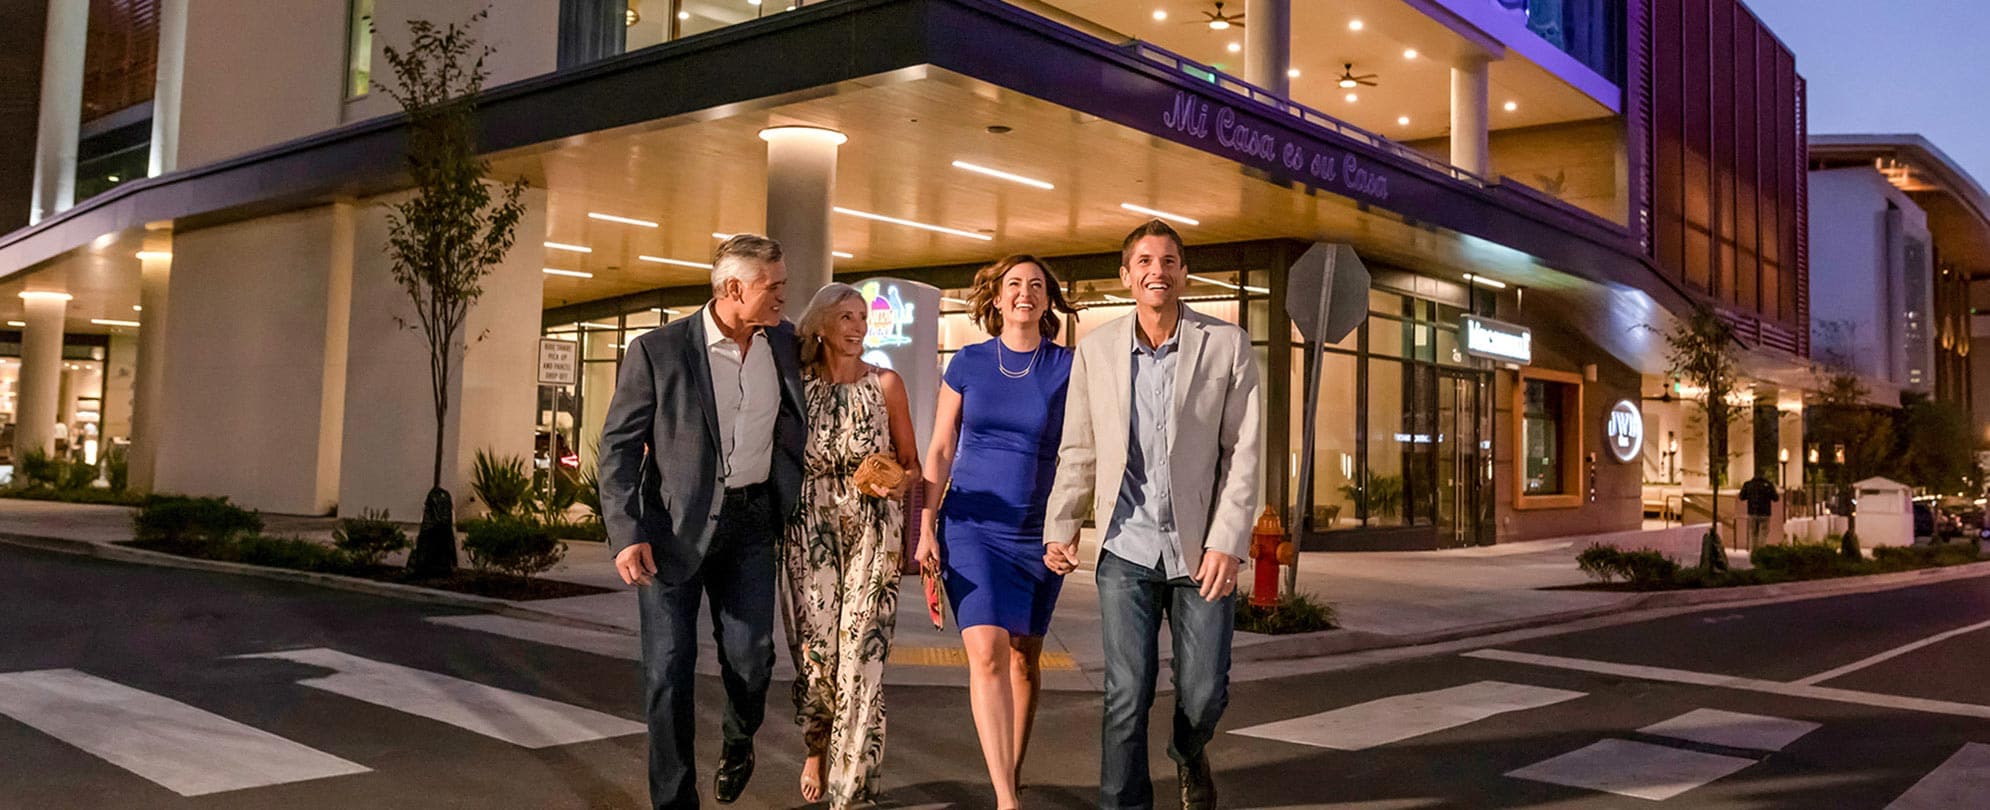 Four smiling adults wearing evening attire and walking outside the Margaritaville Hotel in Nashville, Tennessee